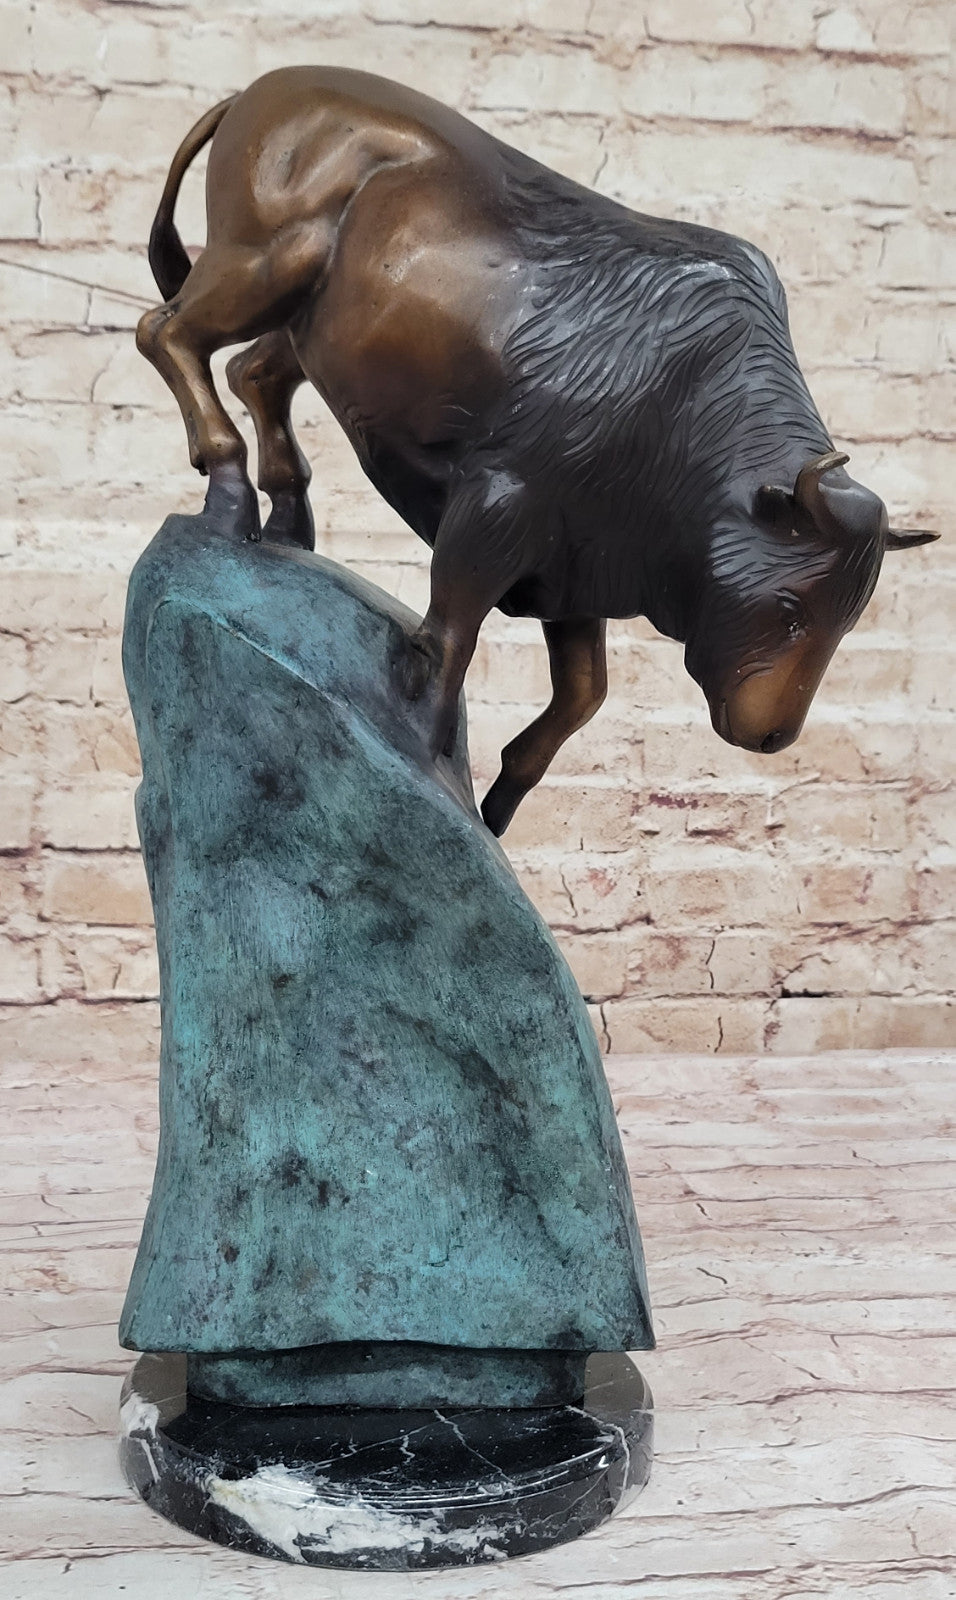 Signed Limited Edition by Marius: Bison Water Buffalo Bronze Sculpture